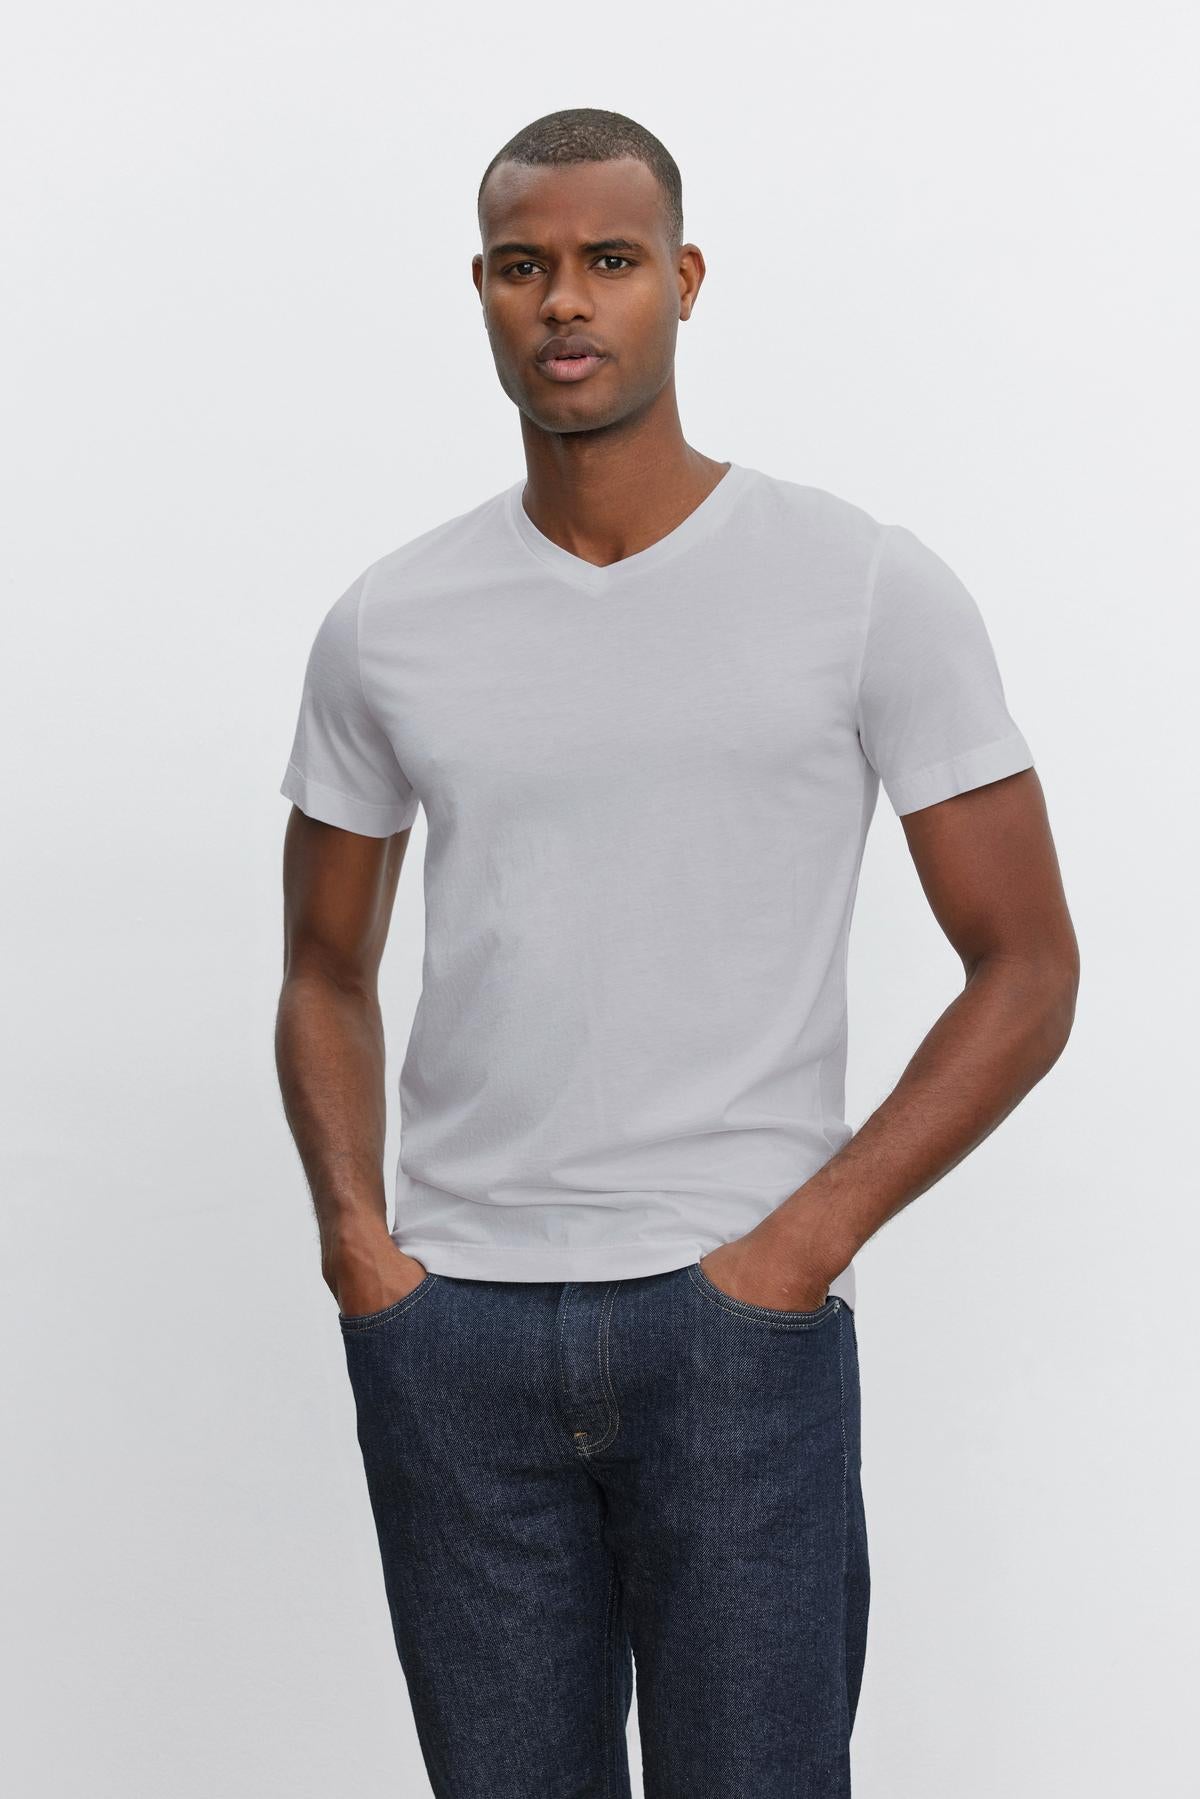 A person is standing with their hands in their pockets, wearing a plain white Velvet by Graham & Spencer SAMSEN TEE with a V-neckline and dark blue jeans—perfect for everyday wear—against a plain white background.-37386135339201